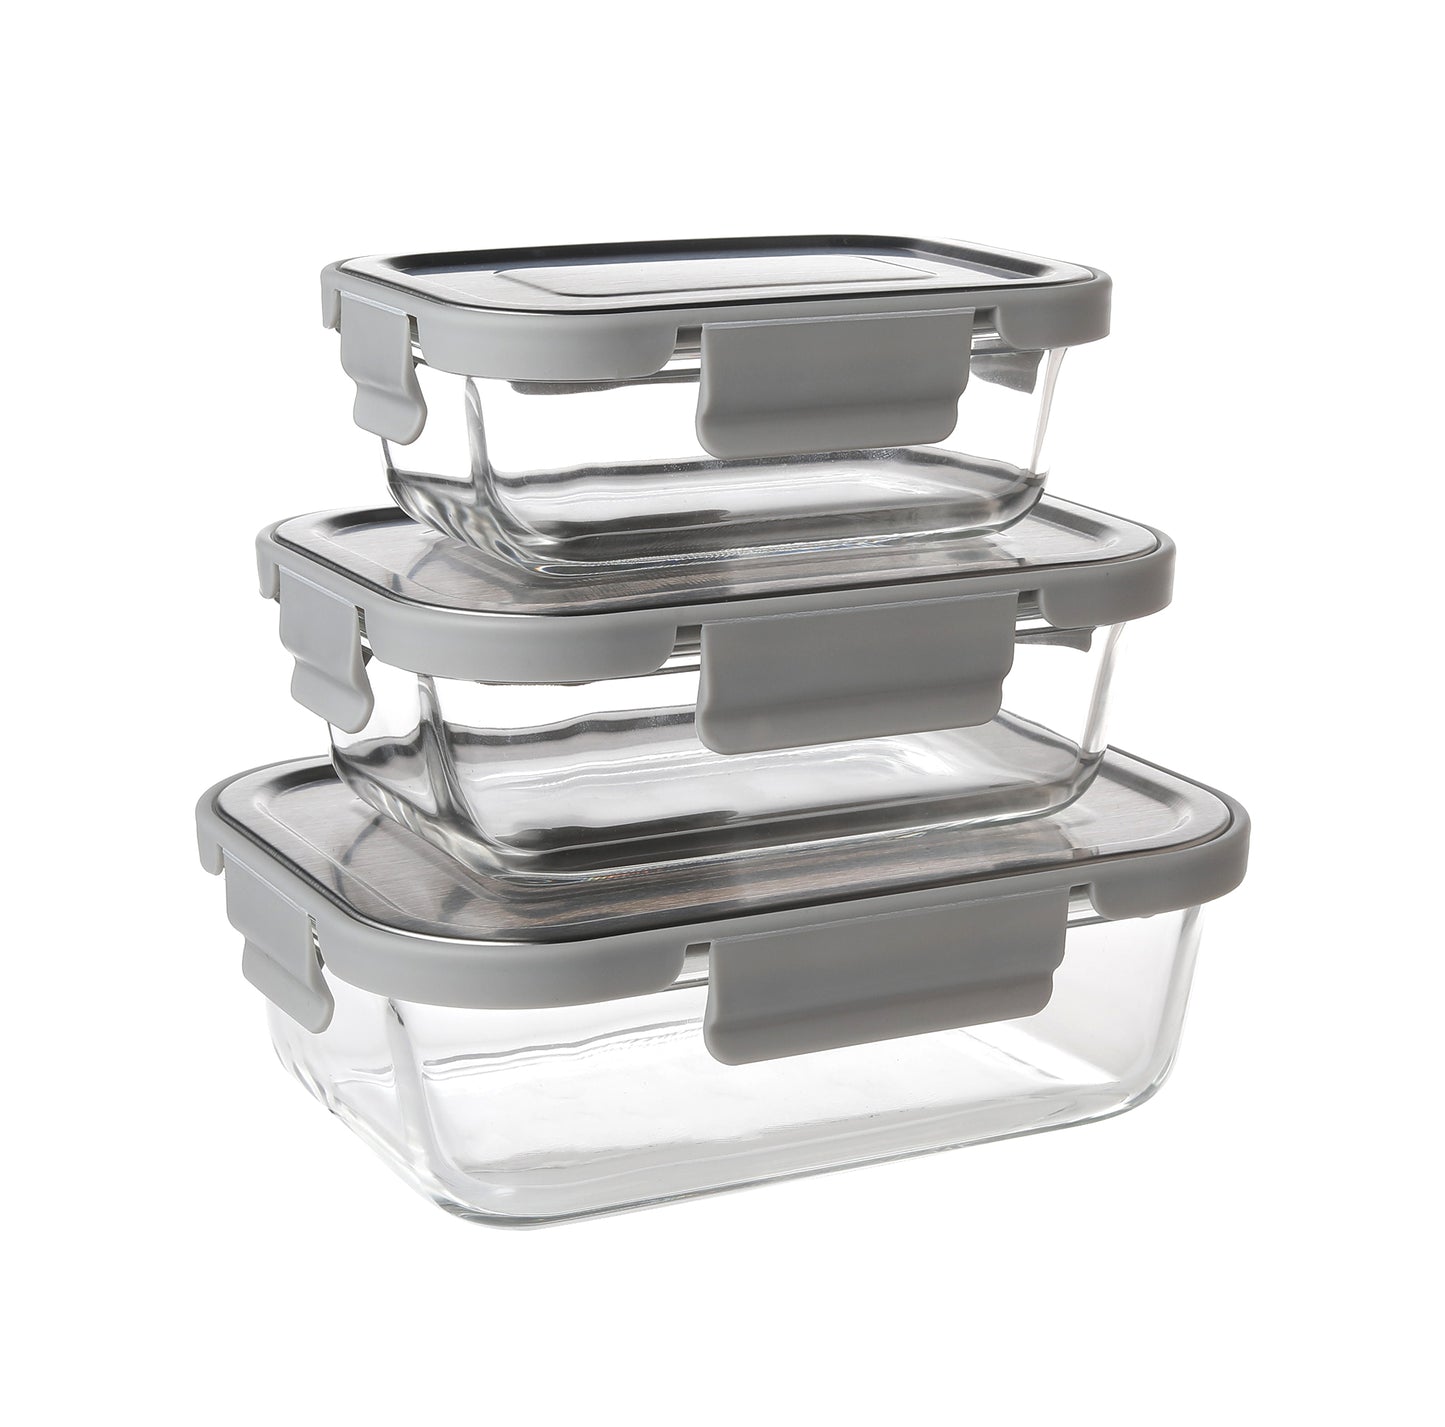 Delight King Glass Food Storage Containers – Set of 3 Glass Meal Prep Containers – Multipurpose Food Storage Containers with Lids Airtight – Eco-Friendly and Reusable Meal Prep Container Glass